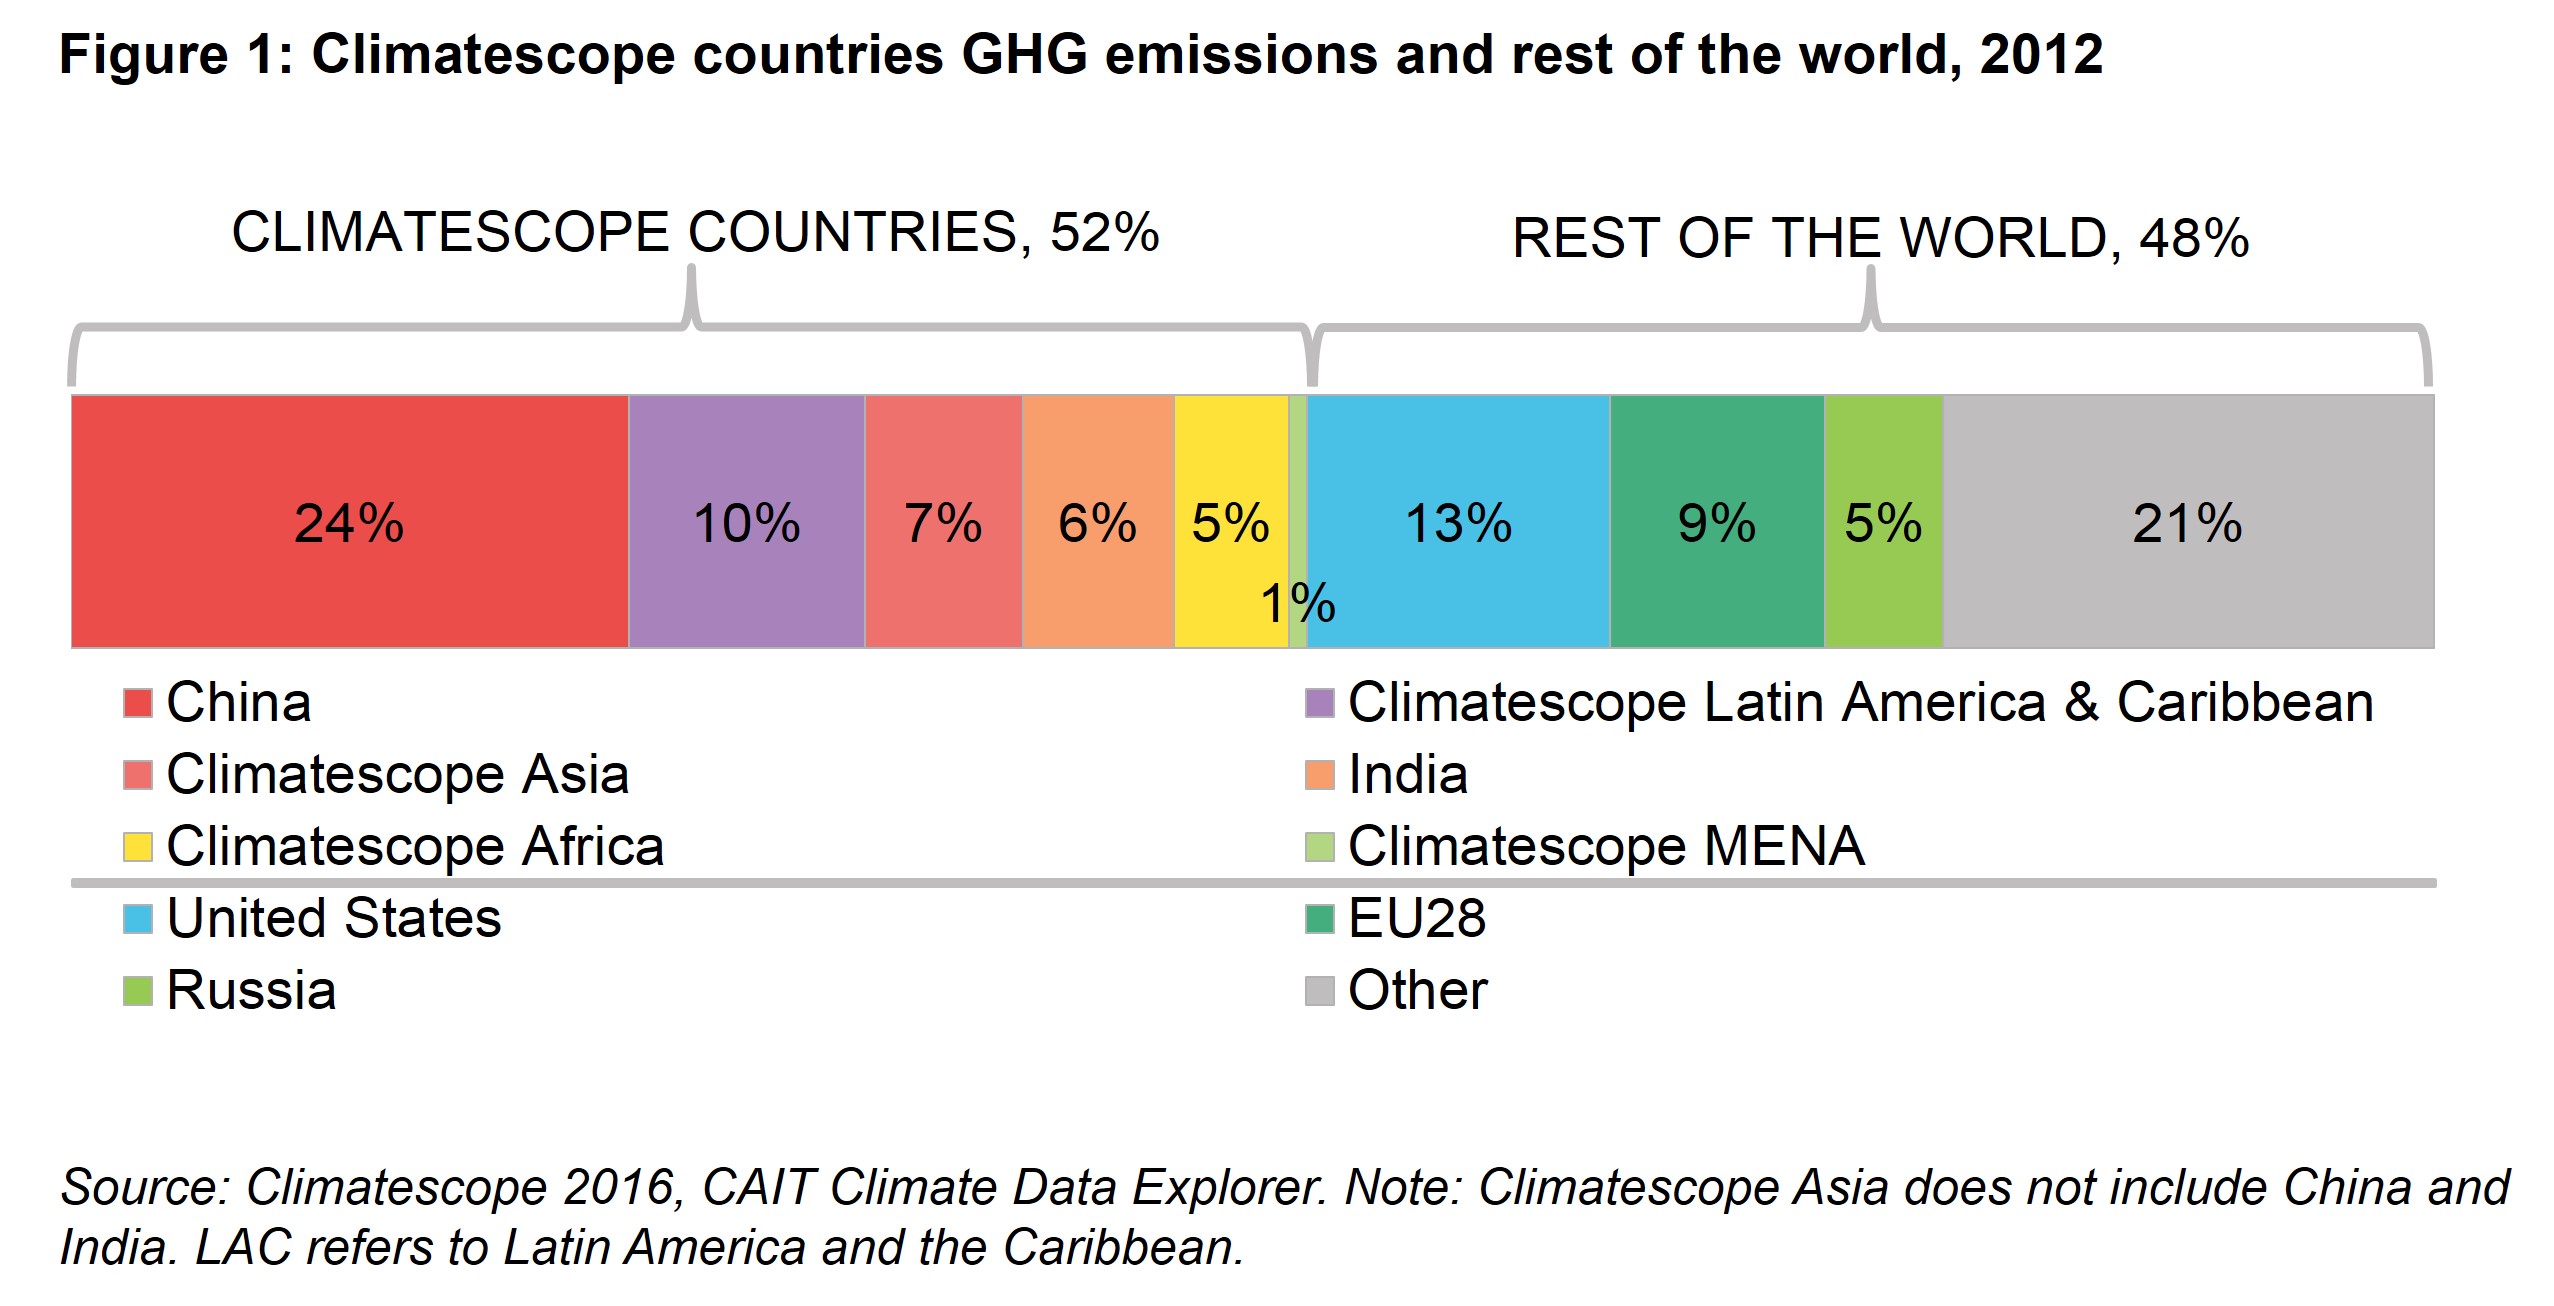 PIV Fig 1 - Climatescope countries GHG emissions and rest of the world, 2012